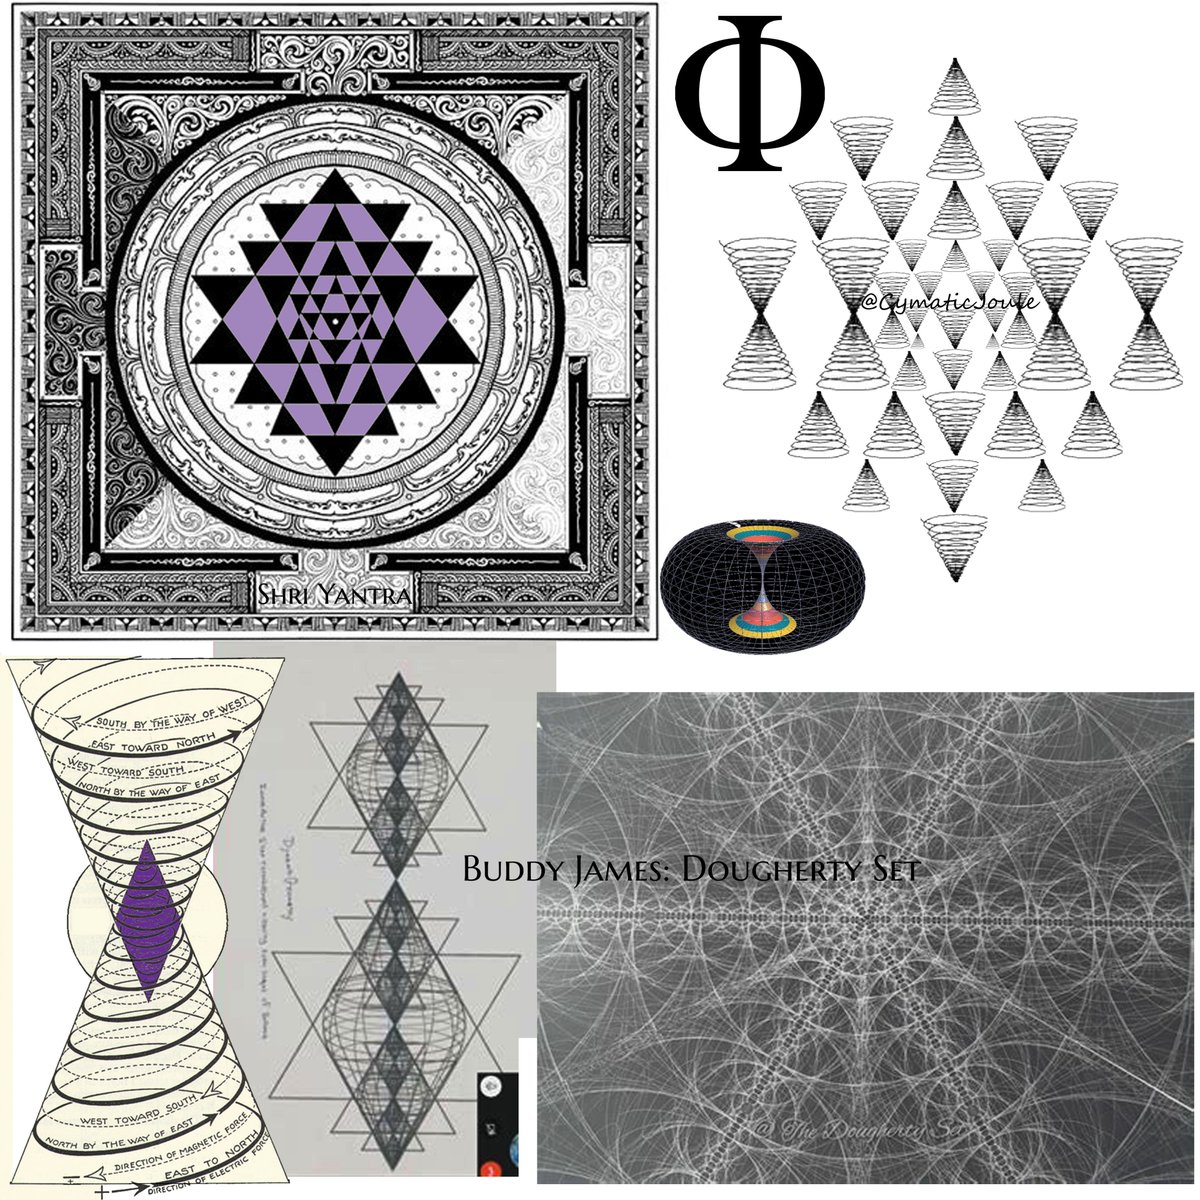 Ancients loved us so much that they embedded insights of Vortex in the Torus wisdom. Awareness of Universal Principles of hyperboloid, Phi, root 2, and the inverse square law. Ancients show us in their mandalas that transcendence is simply mastering the vortices of emote-motion.